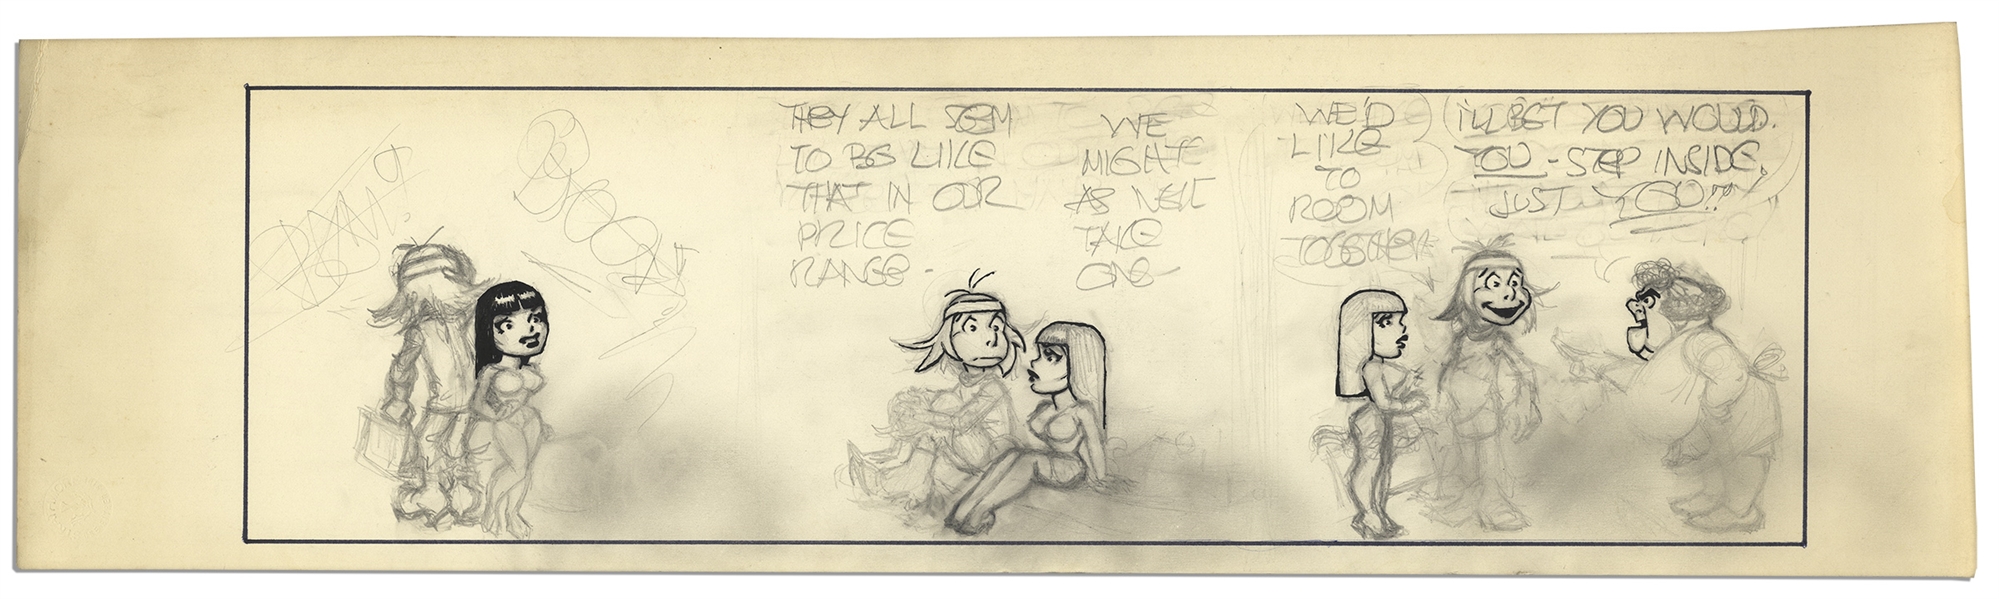 Unfinished Comic Strip by Al Capp in Pencil & Ink -- Undated & Untitled -- 23.5'' x 6.5'' -- Very Good -- From the Al Capp Estate